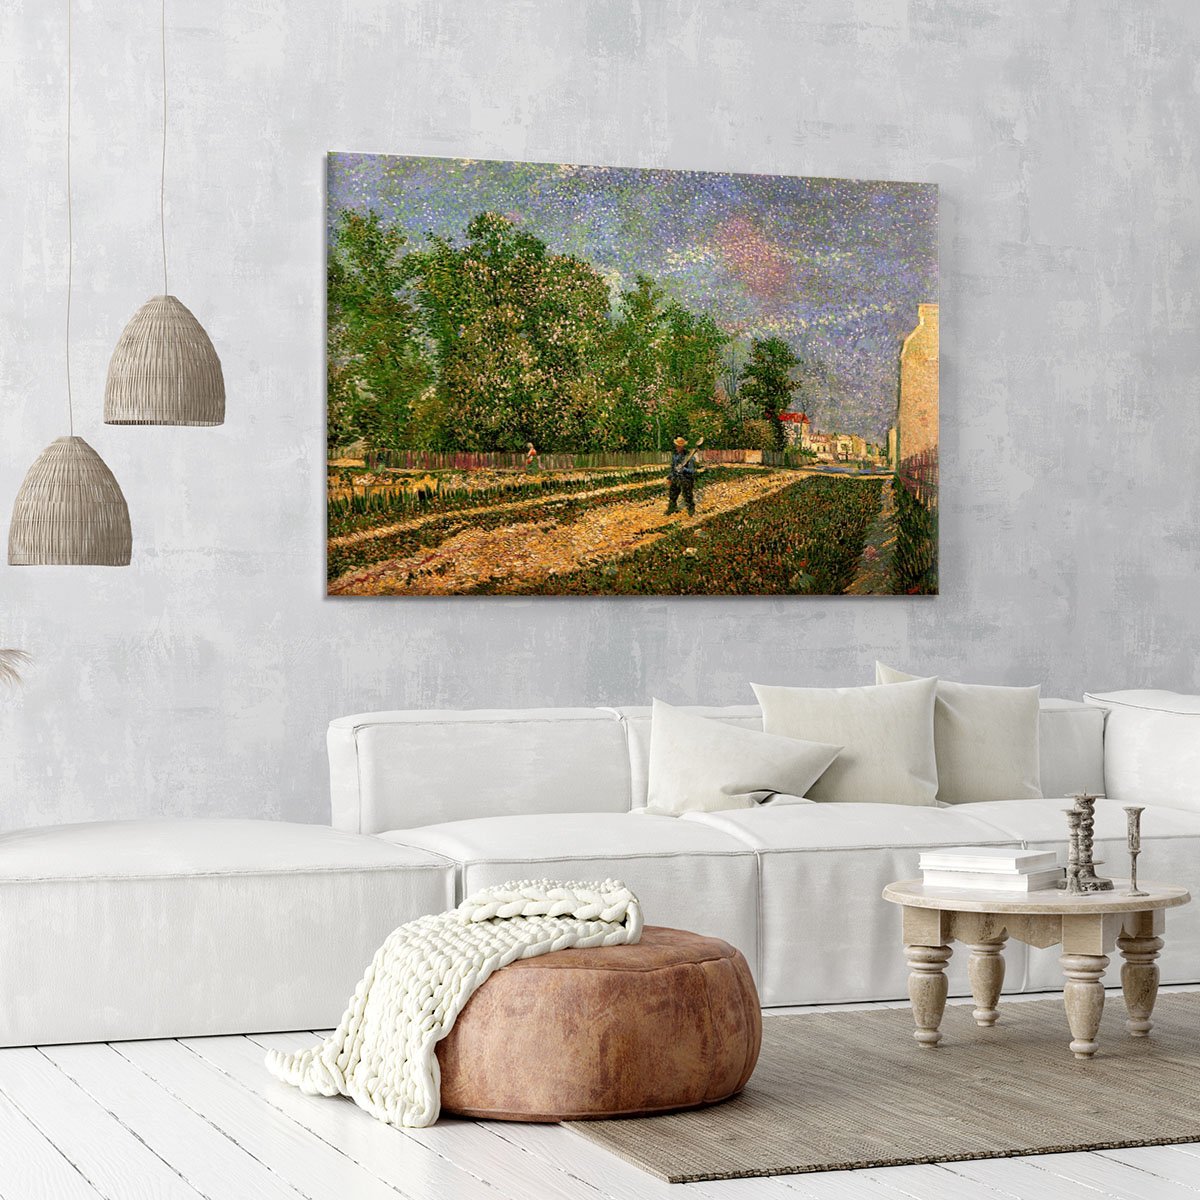 Outskirts of Paris Road with Peasant Shouldering a Spade by Van Gogh Canvas Print or Poster